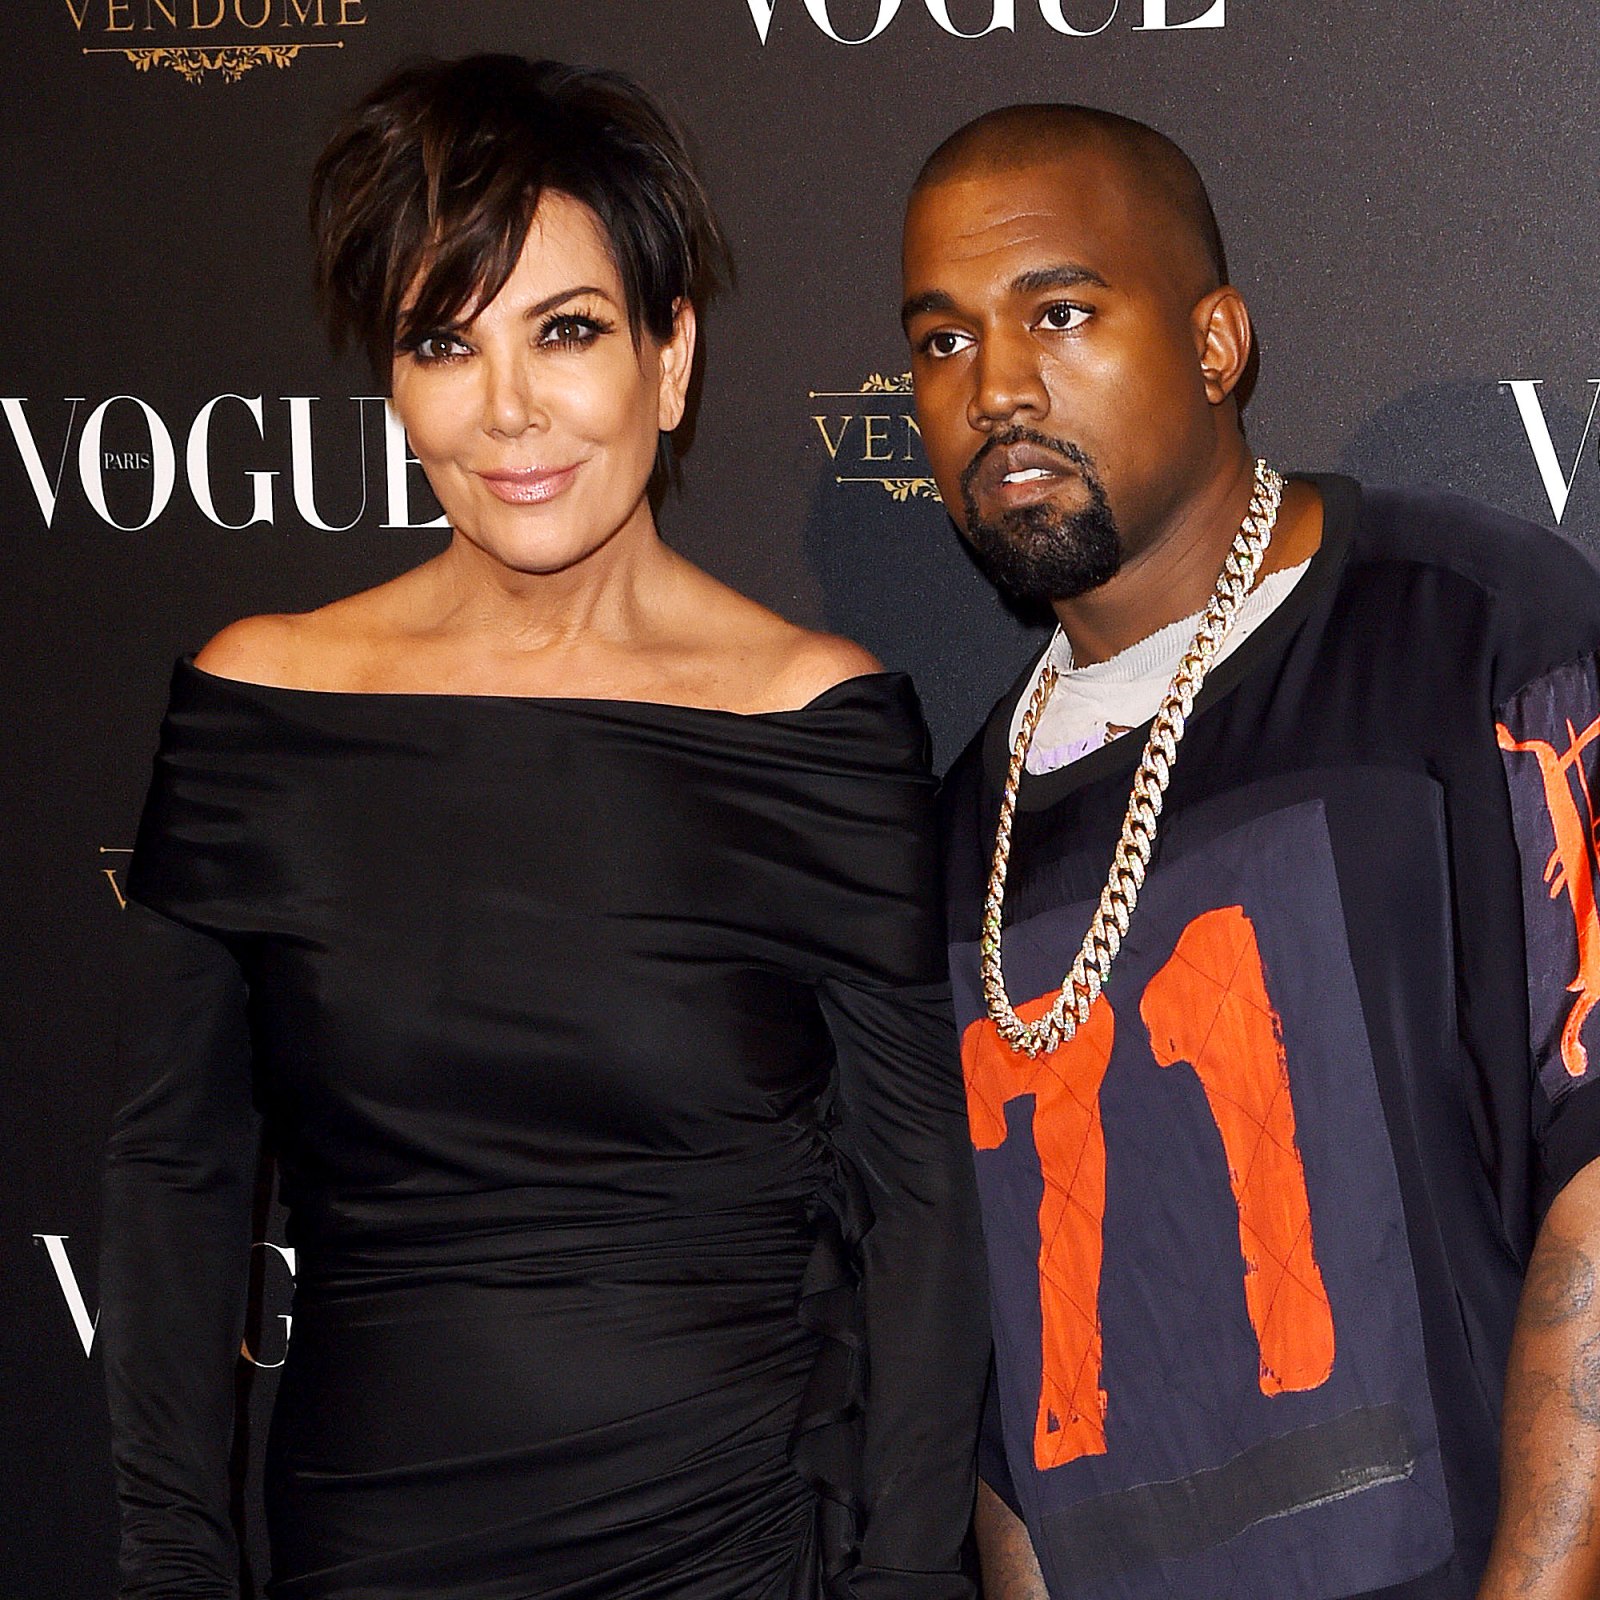 Kris Jenner Wines Down With Help From These Songs